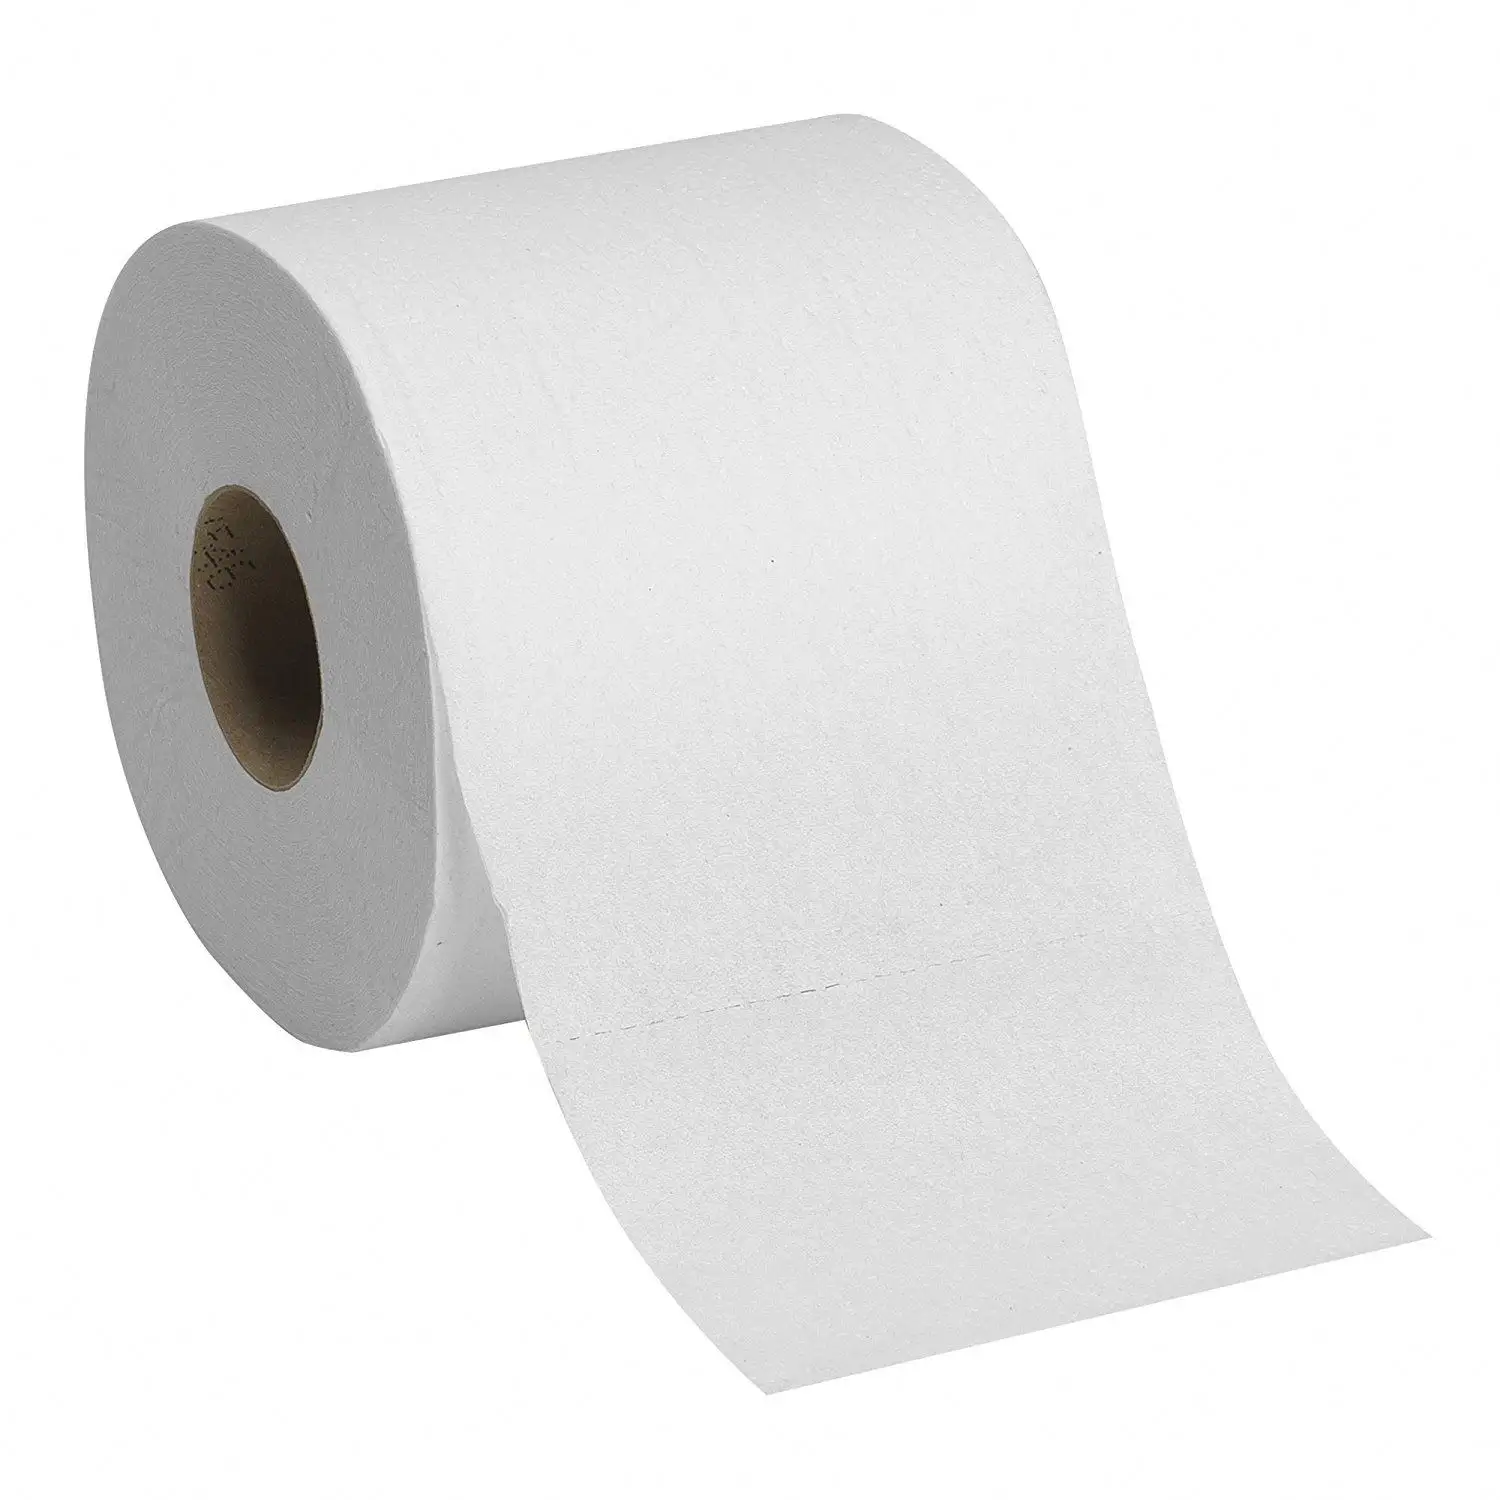 Eco Friendly Wholesale Price Toilet Paper Tissue Roll